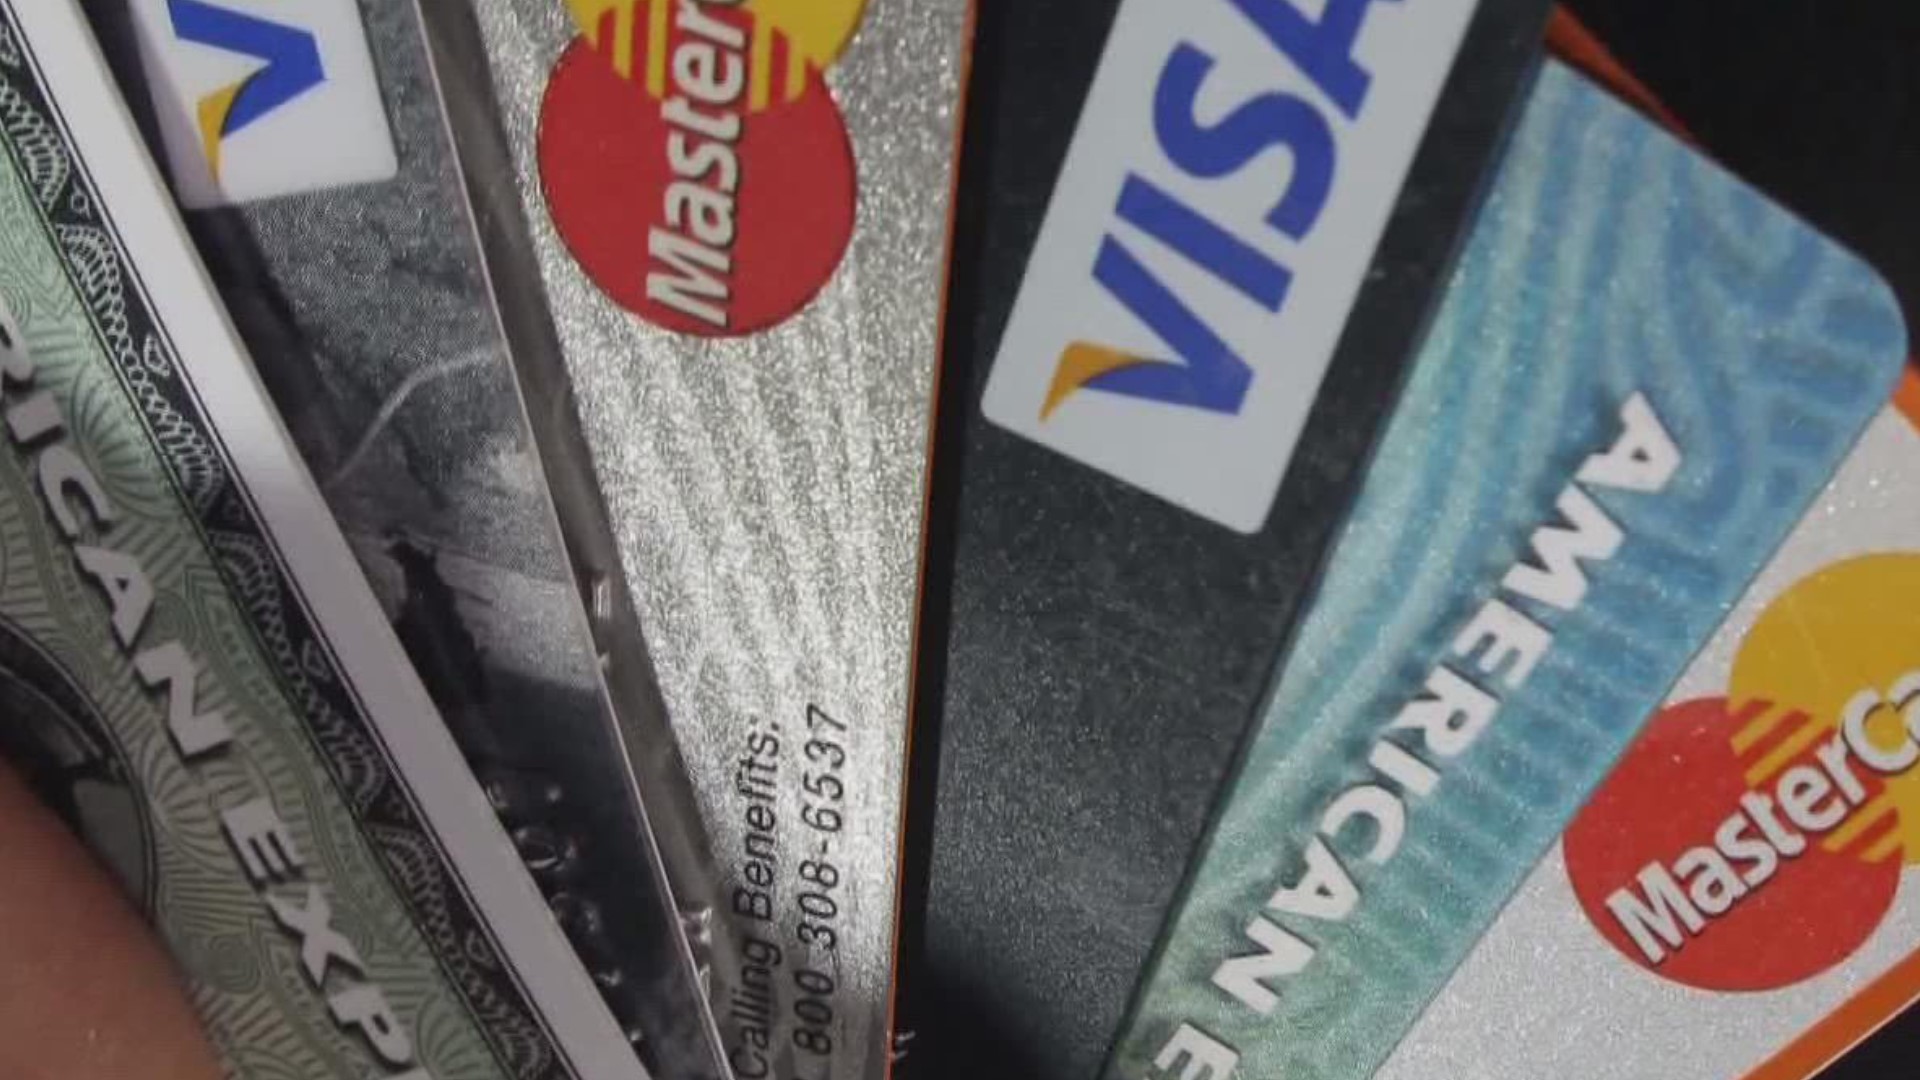 Buy now, pay later plans may be appealing, but does it make more sense to use a credit card instead? We break it down.